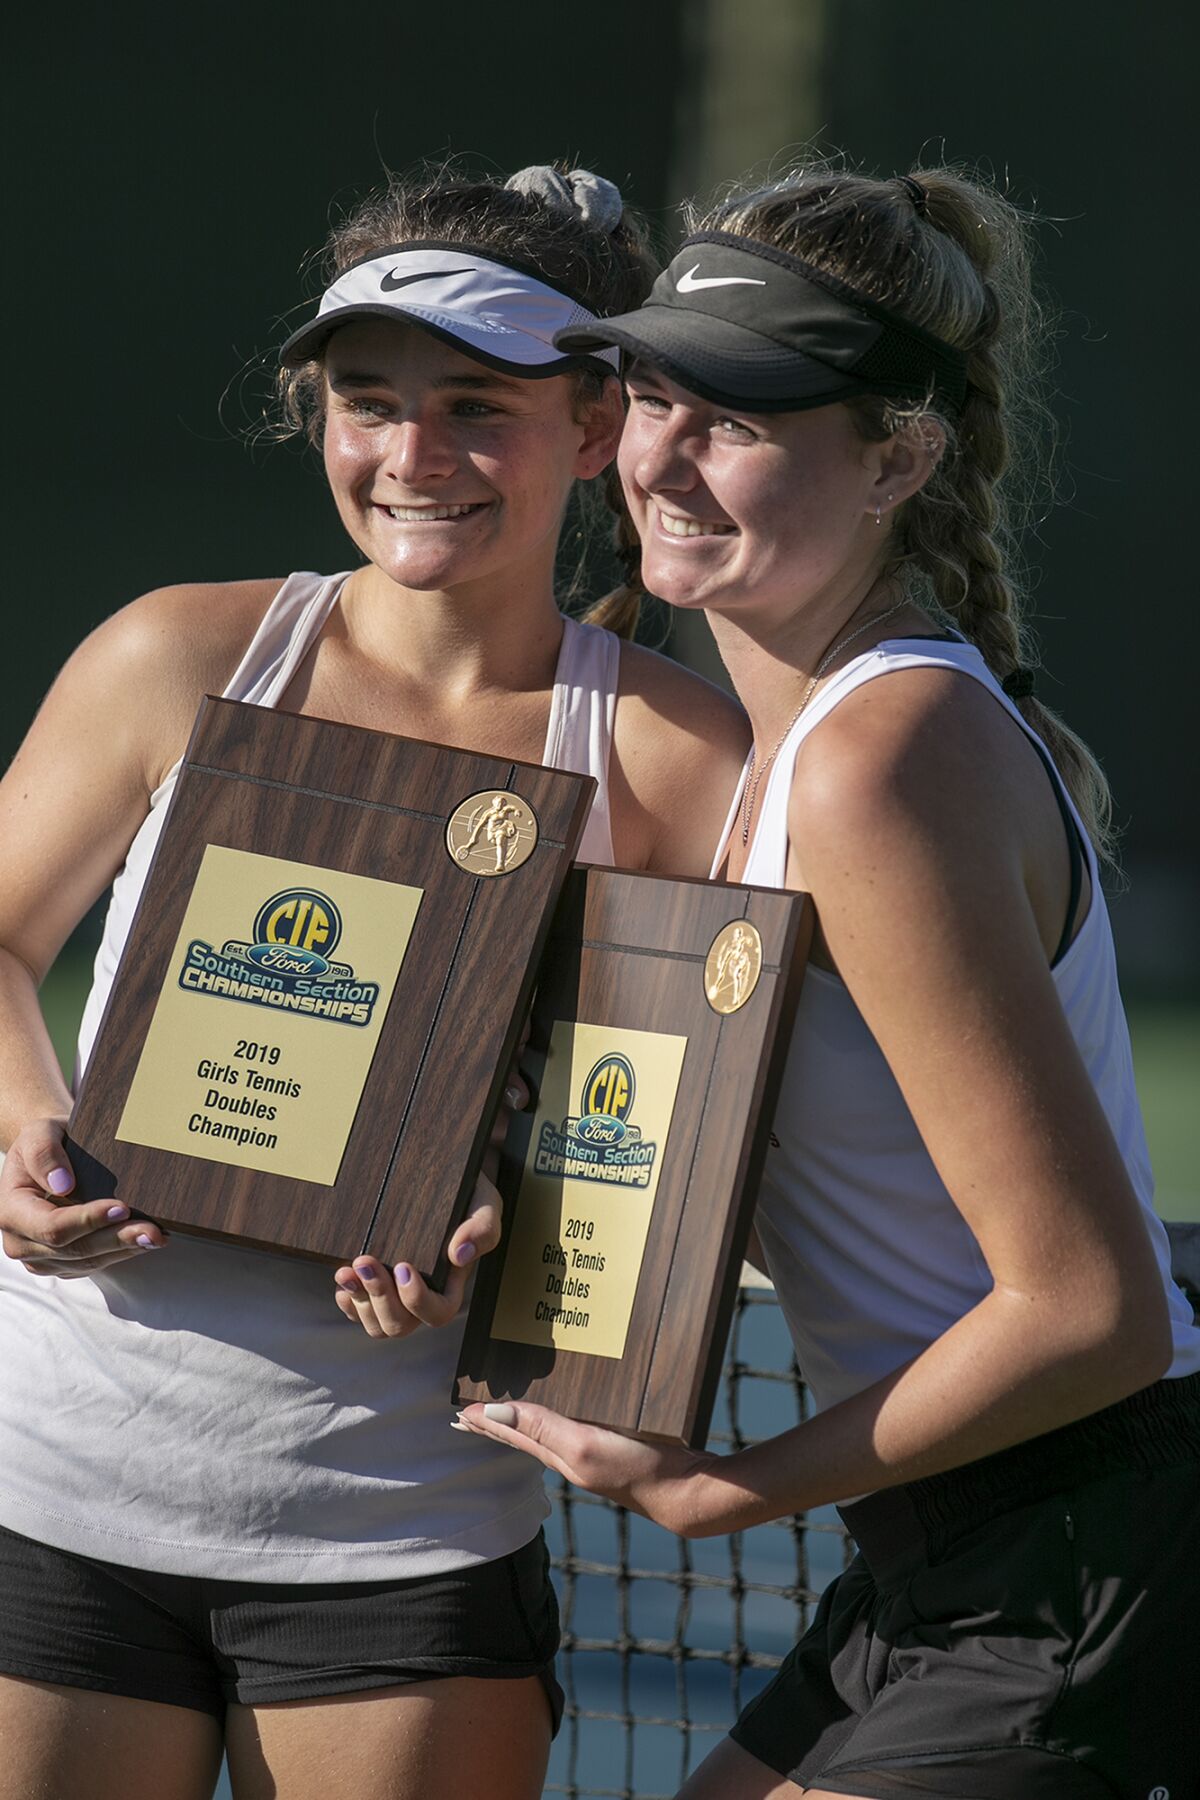 Laguna Beach's Sarah MacCallum, left, and Ella Pachl pose with the CIF Southern Section Individuals doubles championship plaques on Monday at Seal Beach Tennis Center.